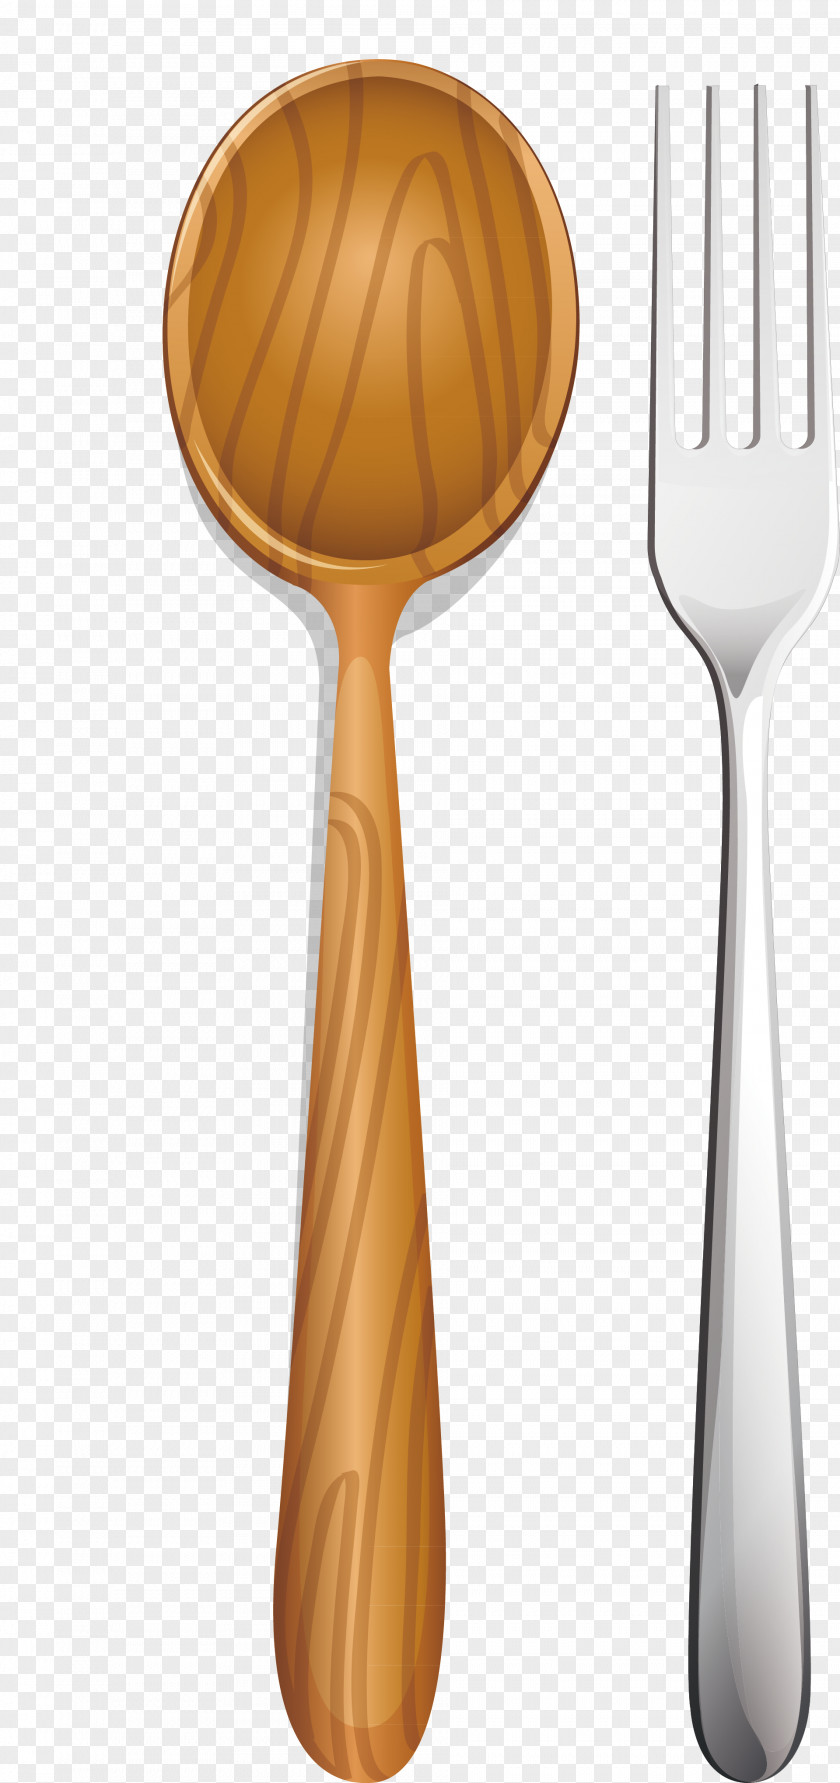 The Spoon Is Beautifully Decorated And Patterned Wooden Fork Ladle Clip Art PNG